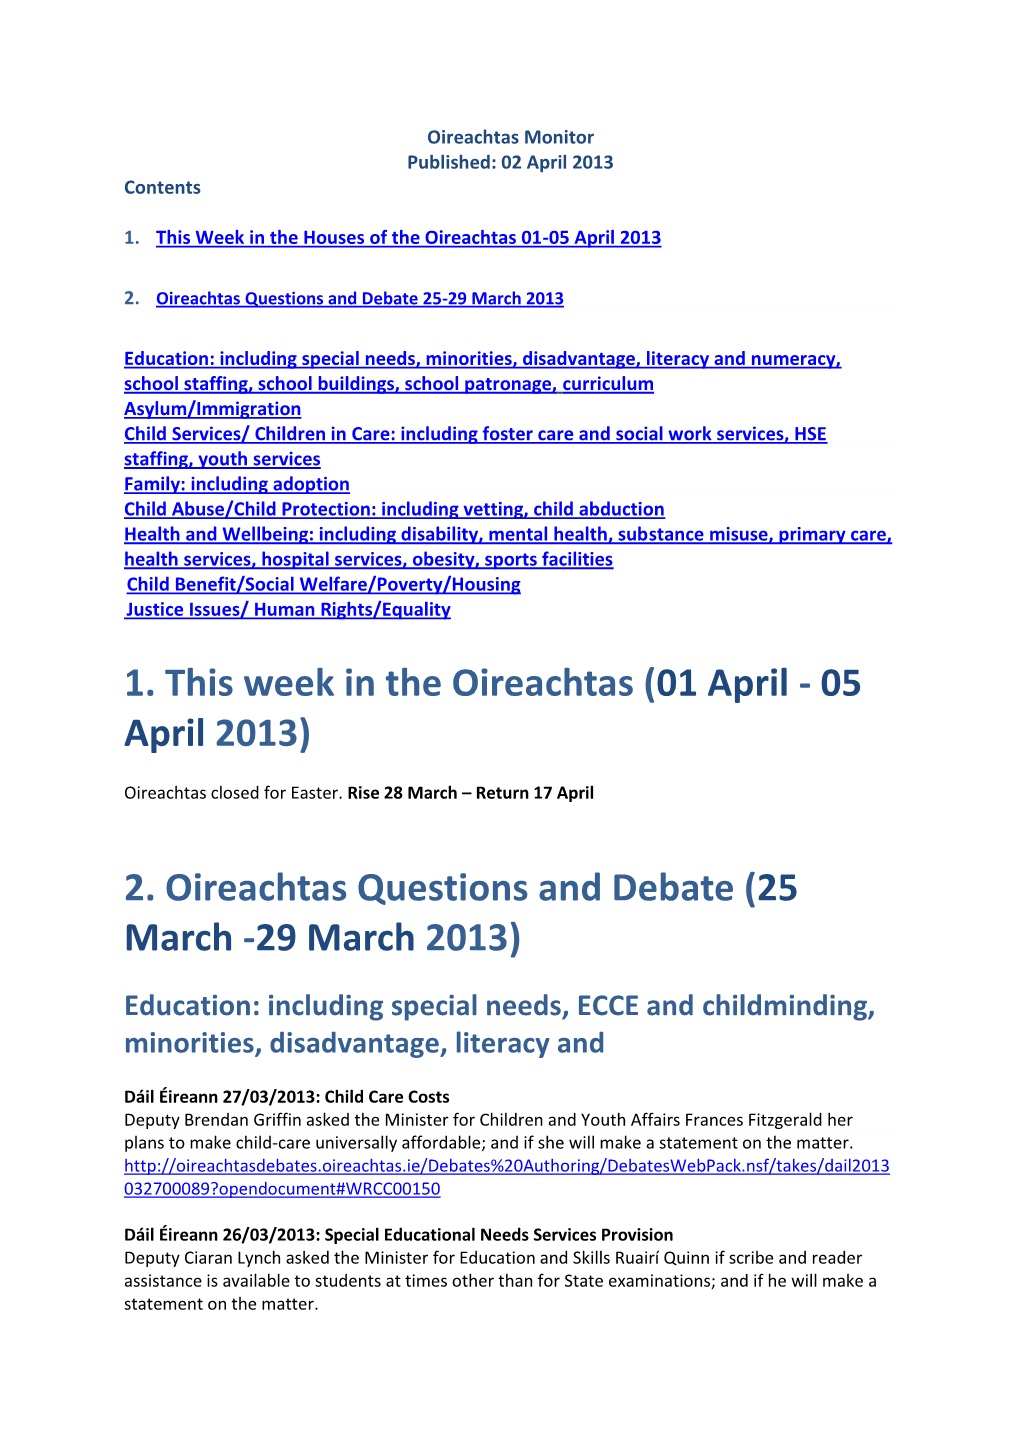 2. Oireachtas Questions and Debate (25 March -29 March 2013)